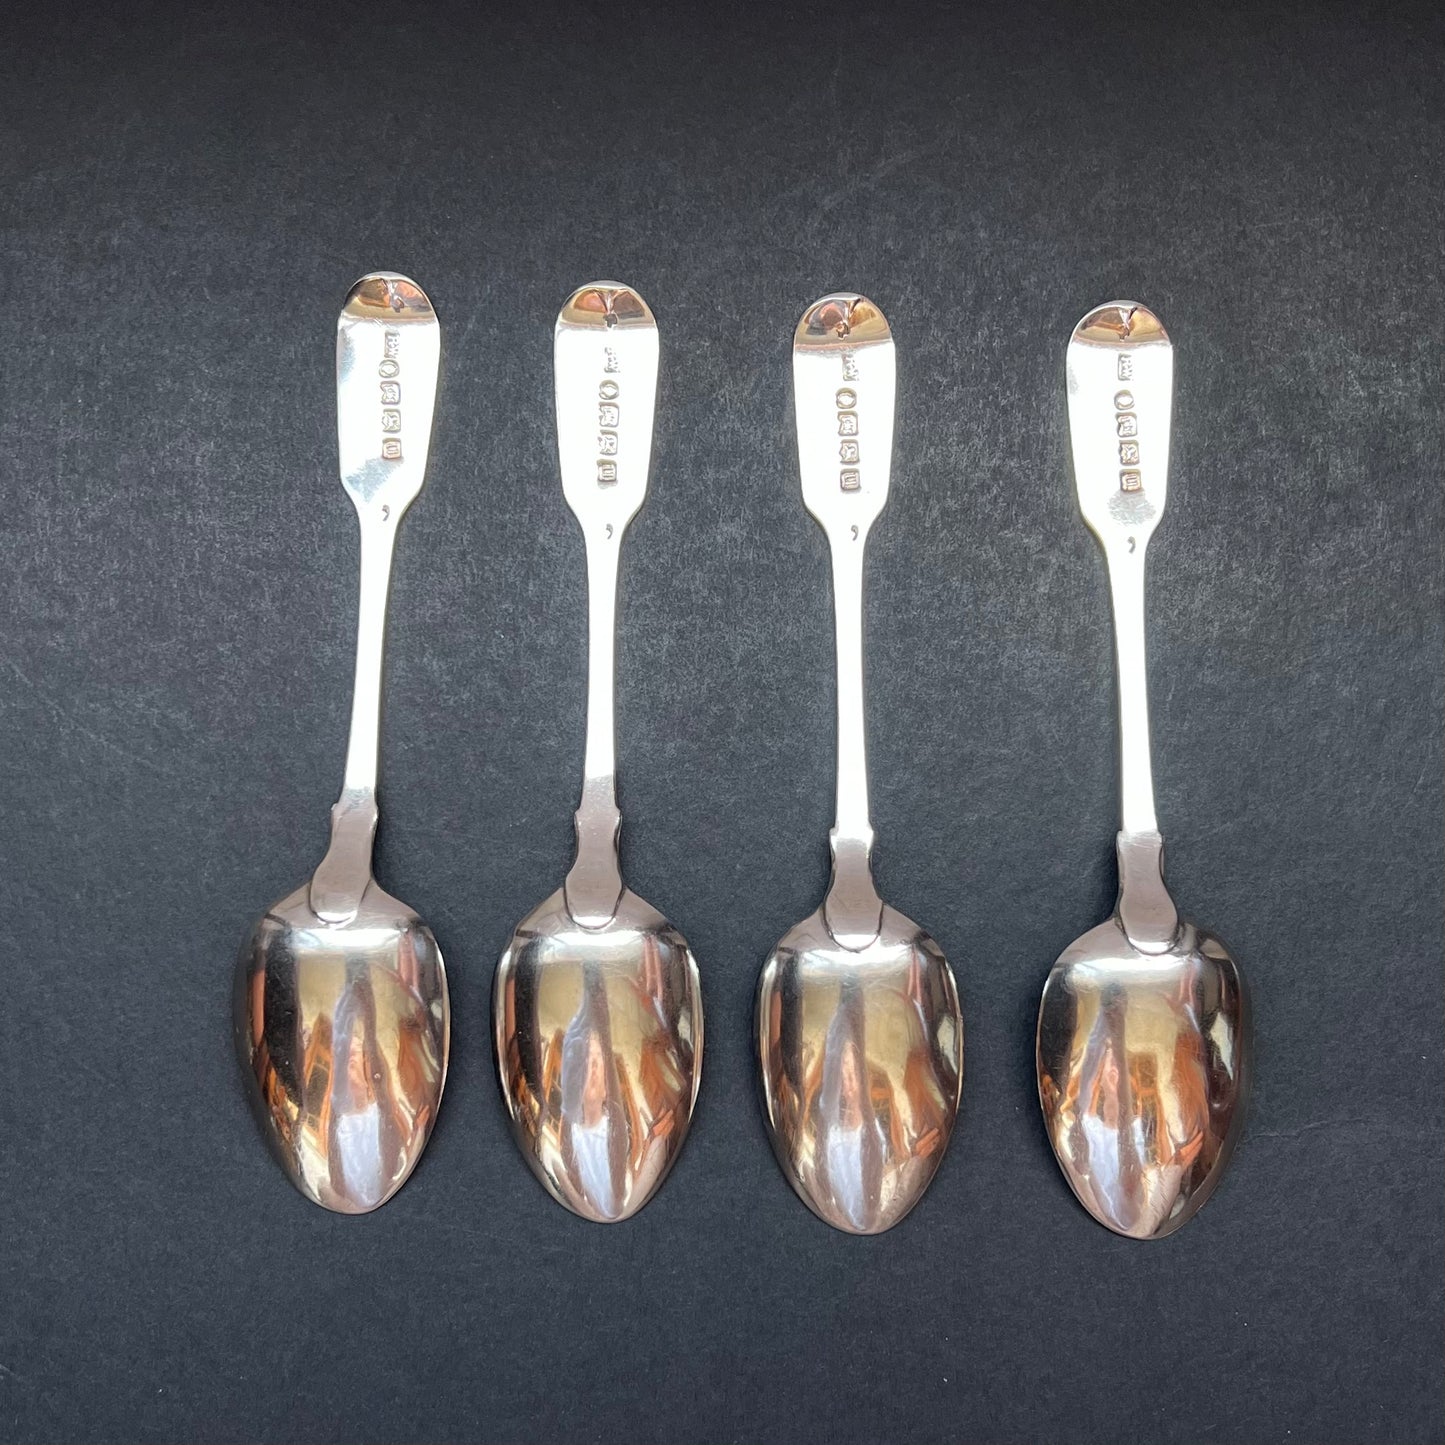 Set of 4 William IV sterling silver spoons, Robert Williams, 1836, Exeter